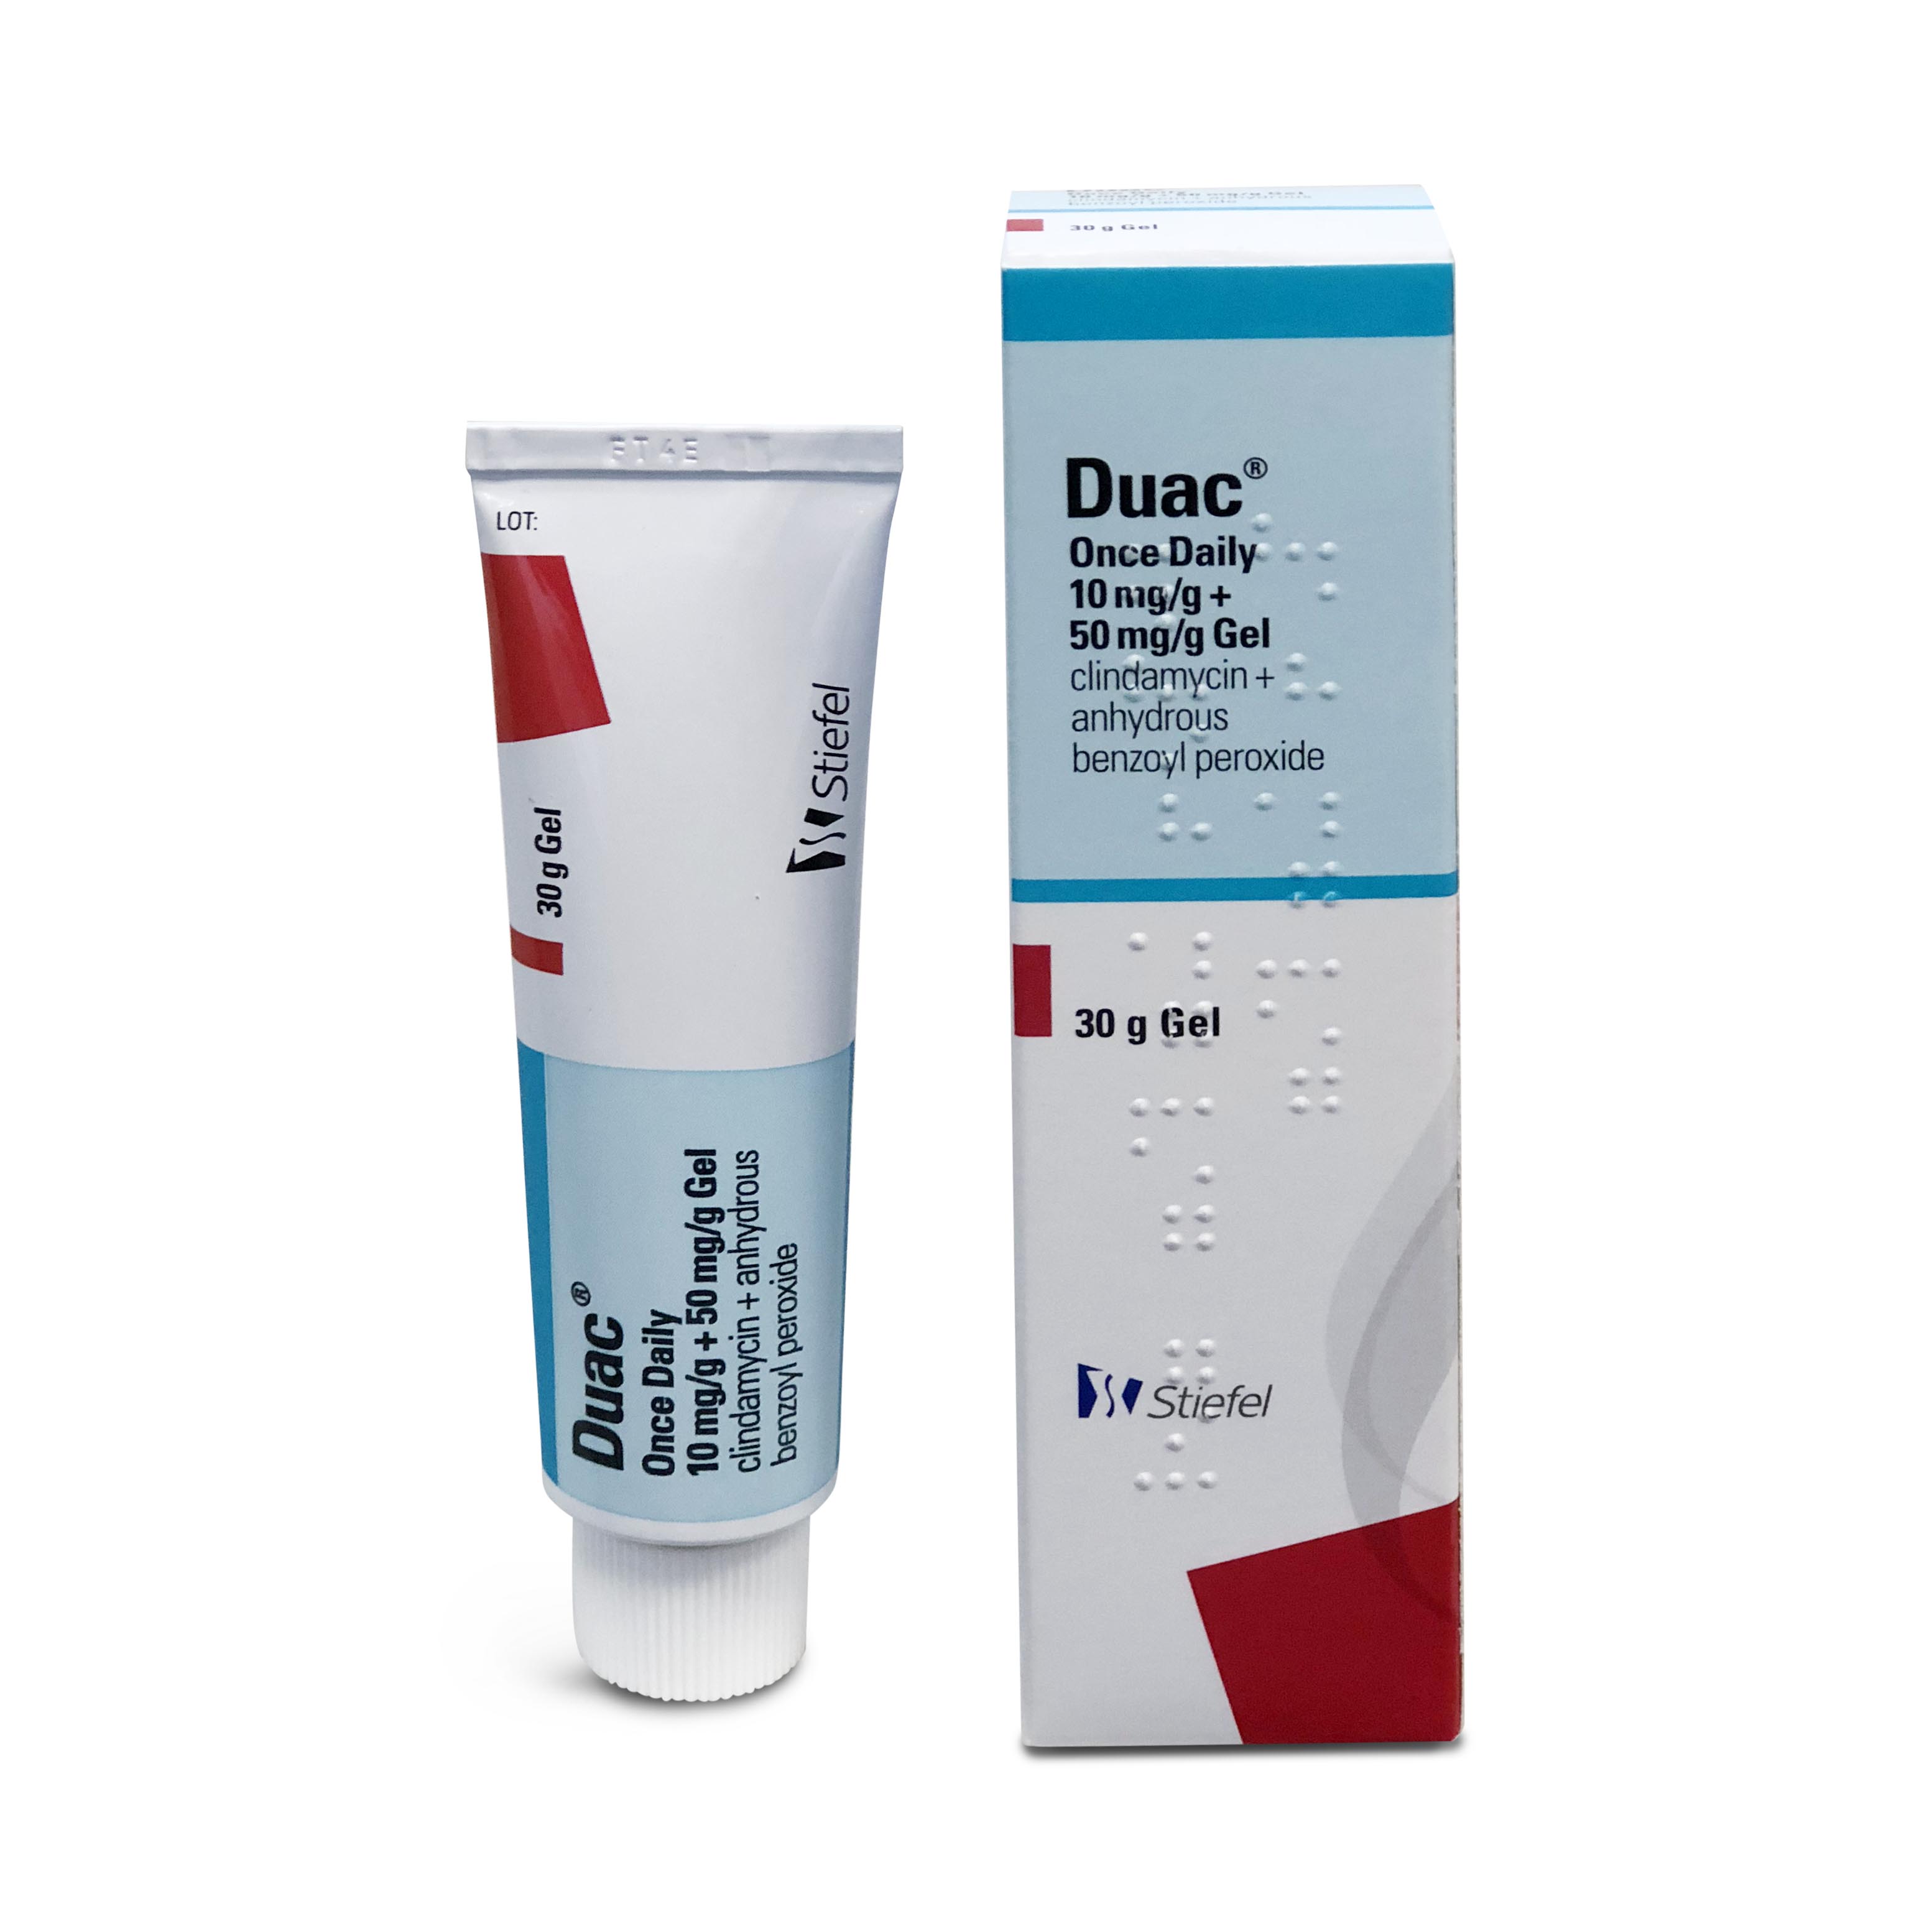 Duac Gel 5% once daily